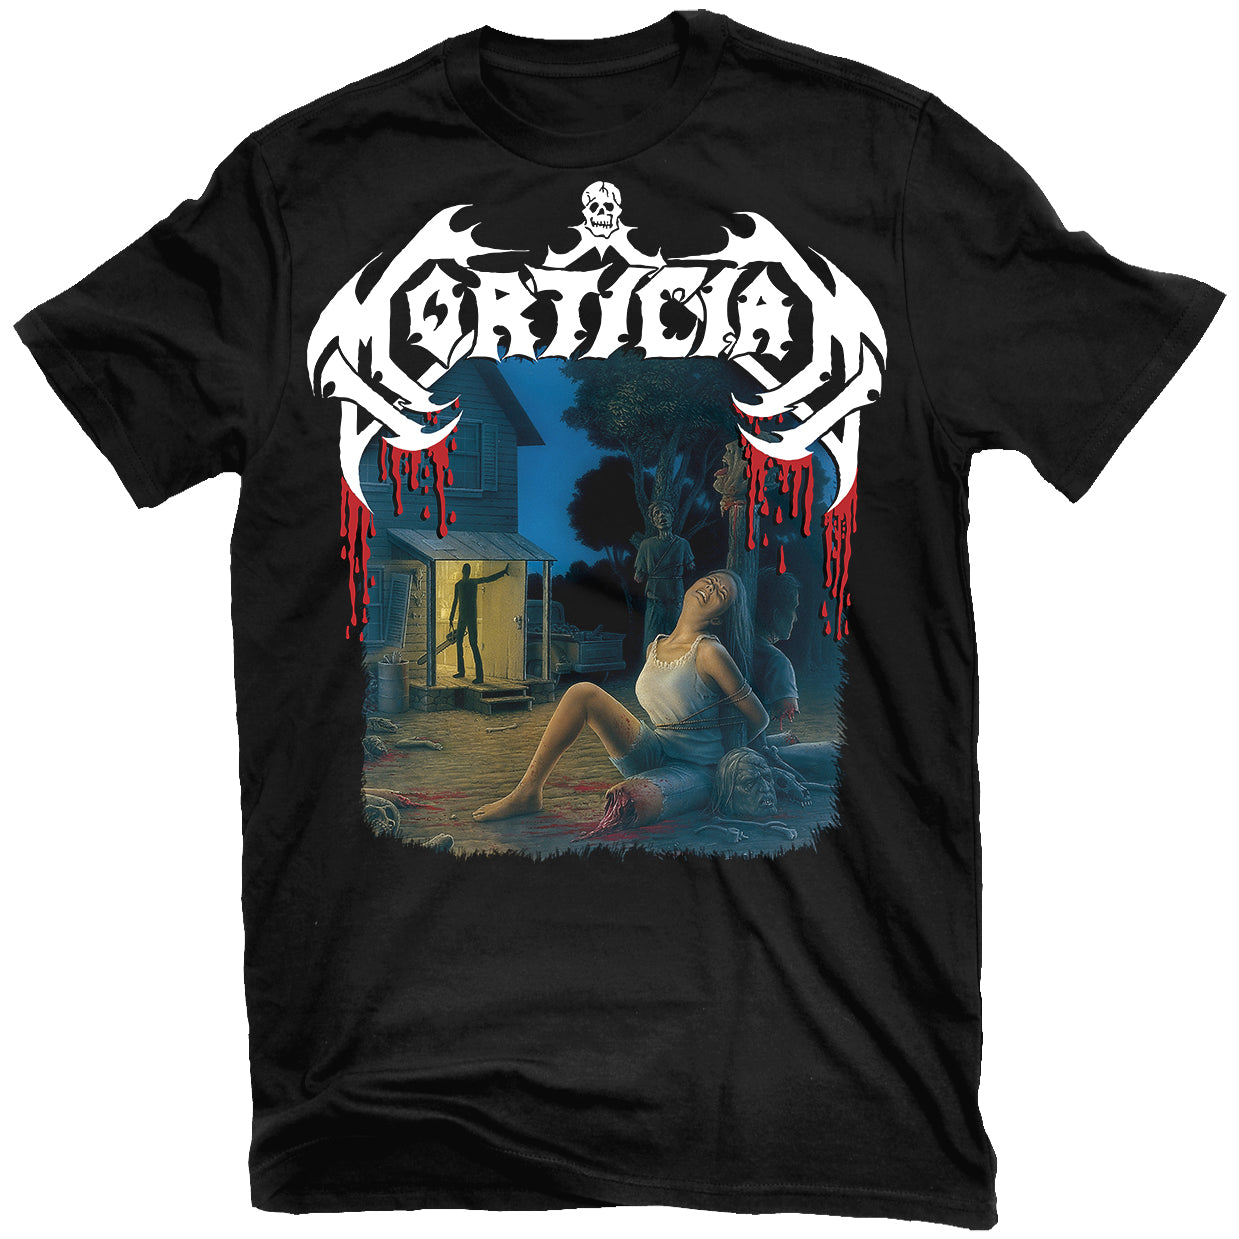 Mortician "Chainsaw Dismemberment" T-Shirt